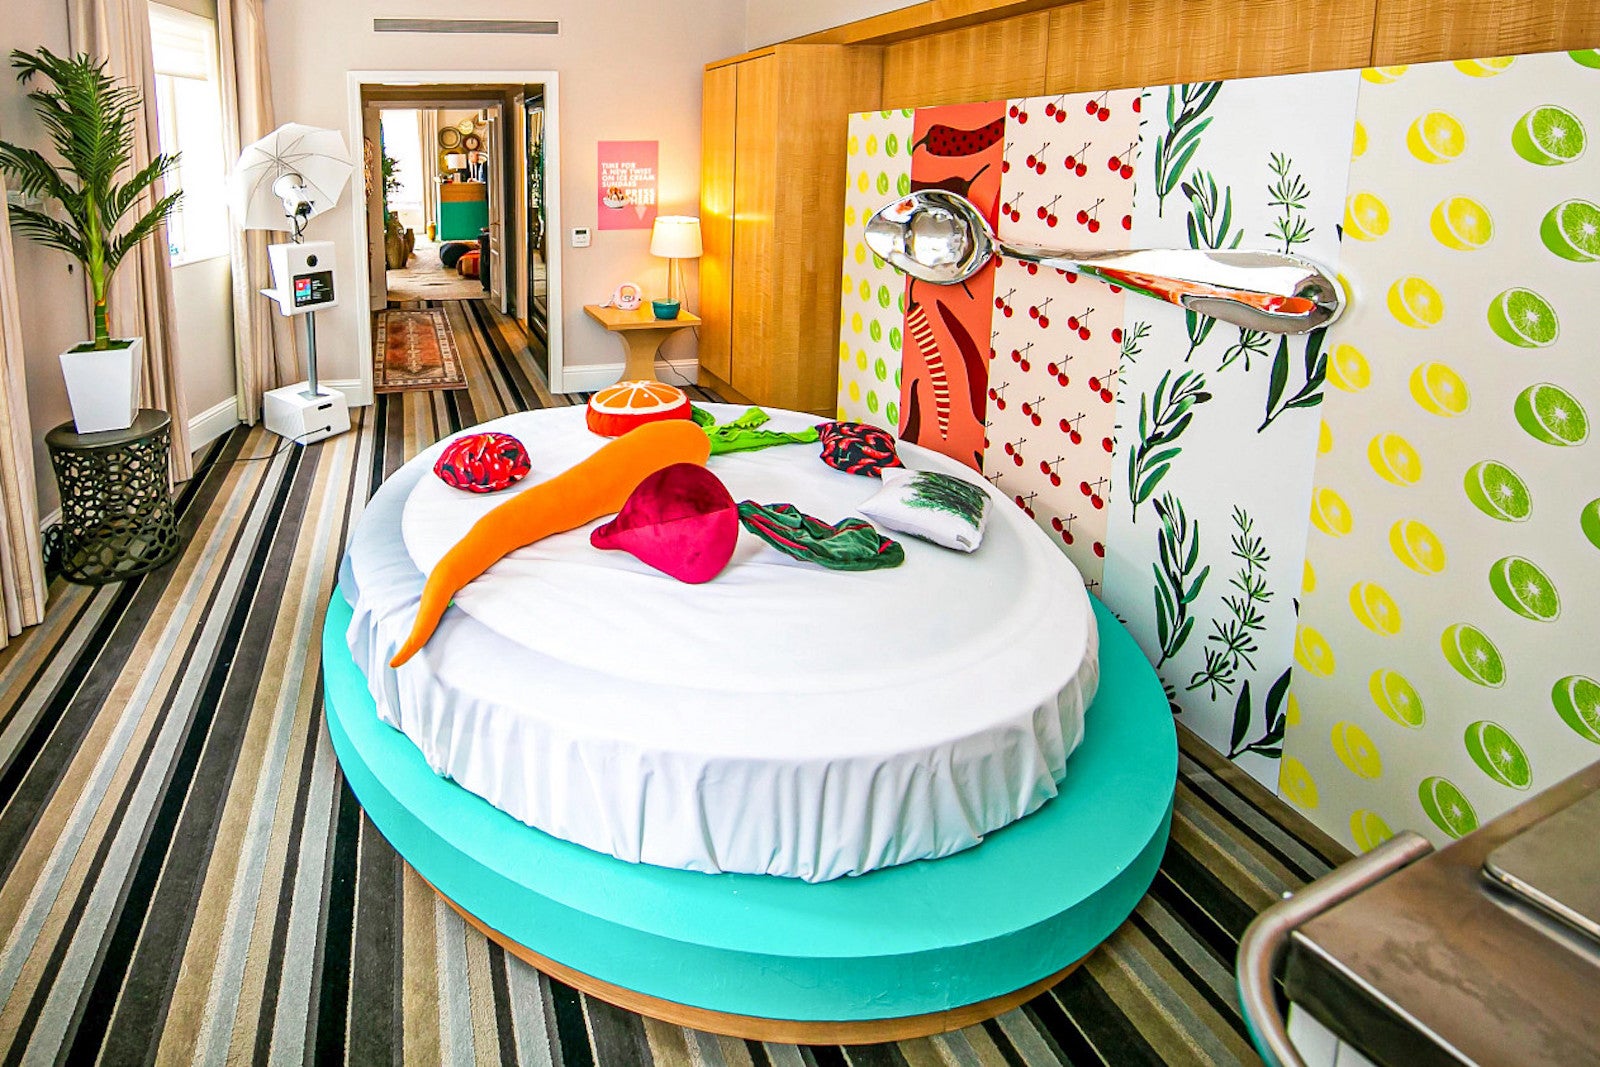 hotel room with food-themed wallpaper, circular bed with food-shaped pillows